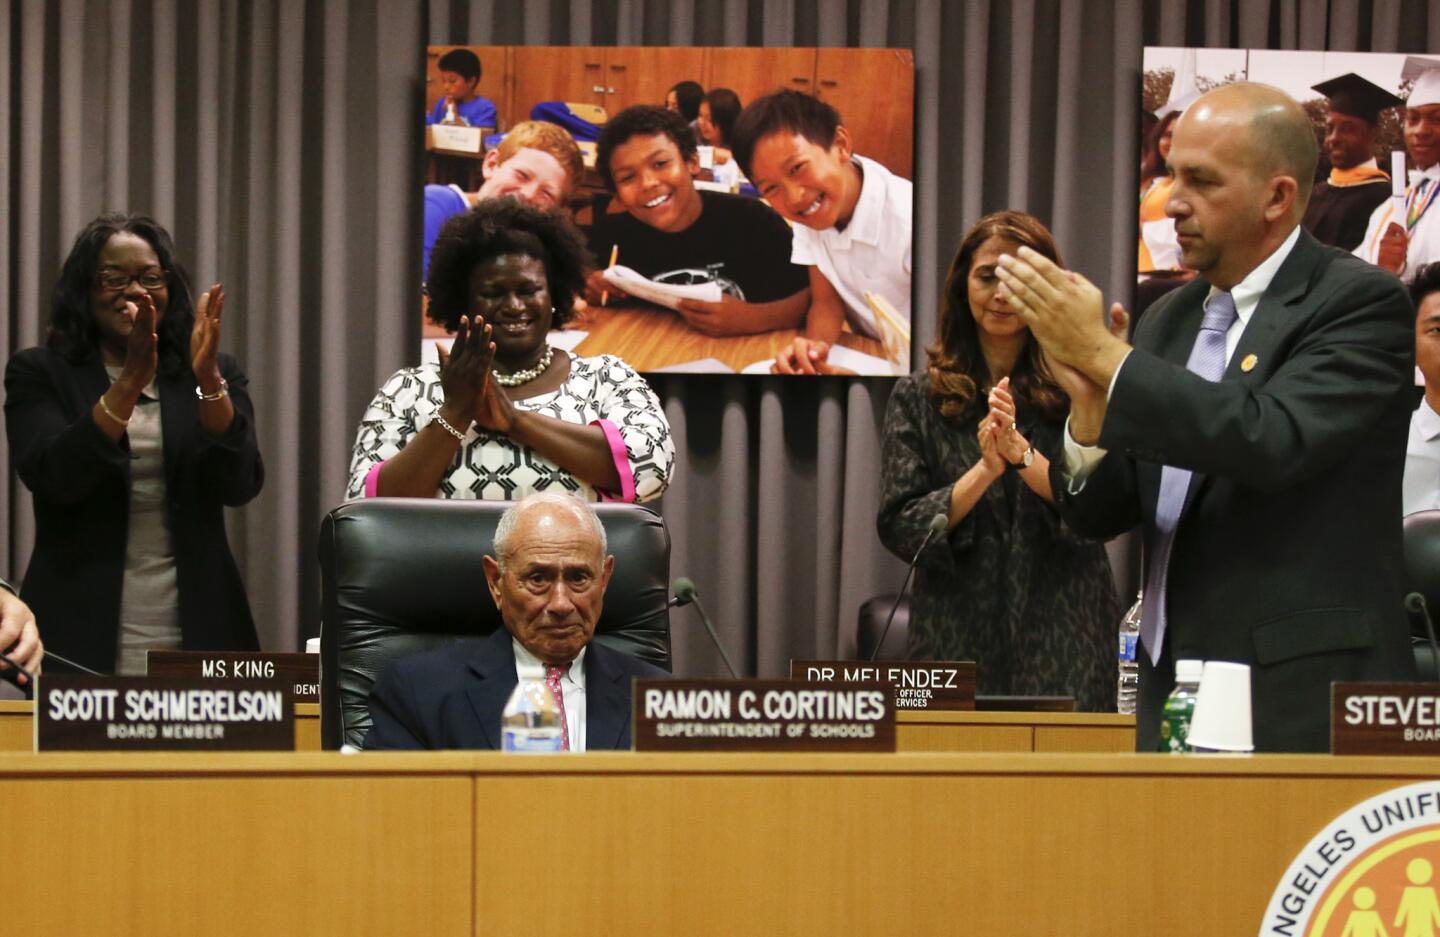 LAUSD board members and staff give a standing ovation to outgoing LAUSD Supt. Ramon C. Cortines during the annual meeting at LAUSD headquarters.